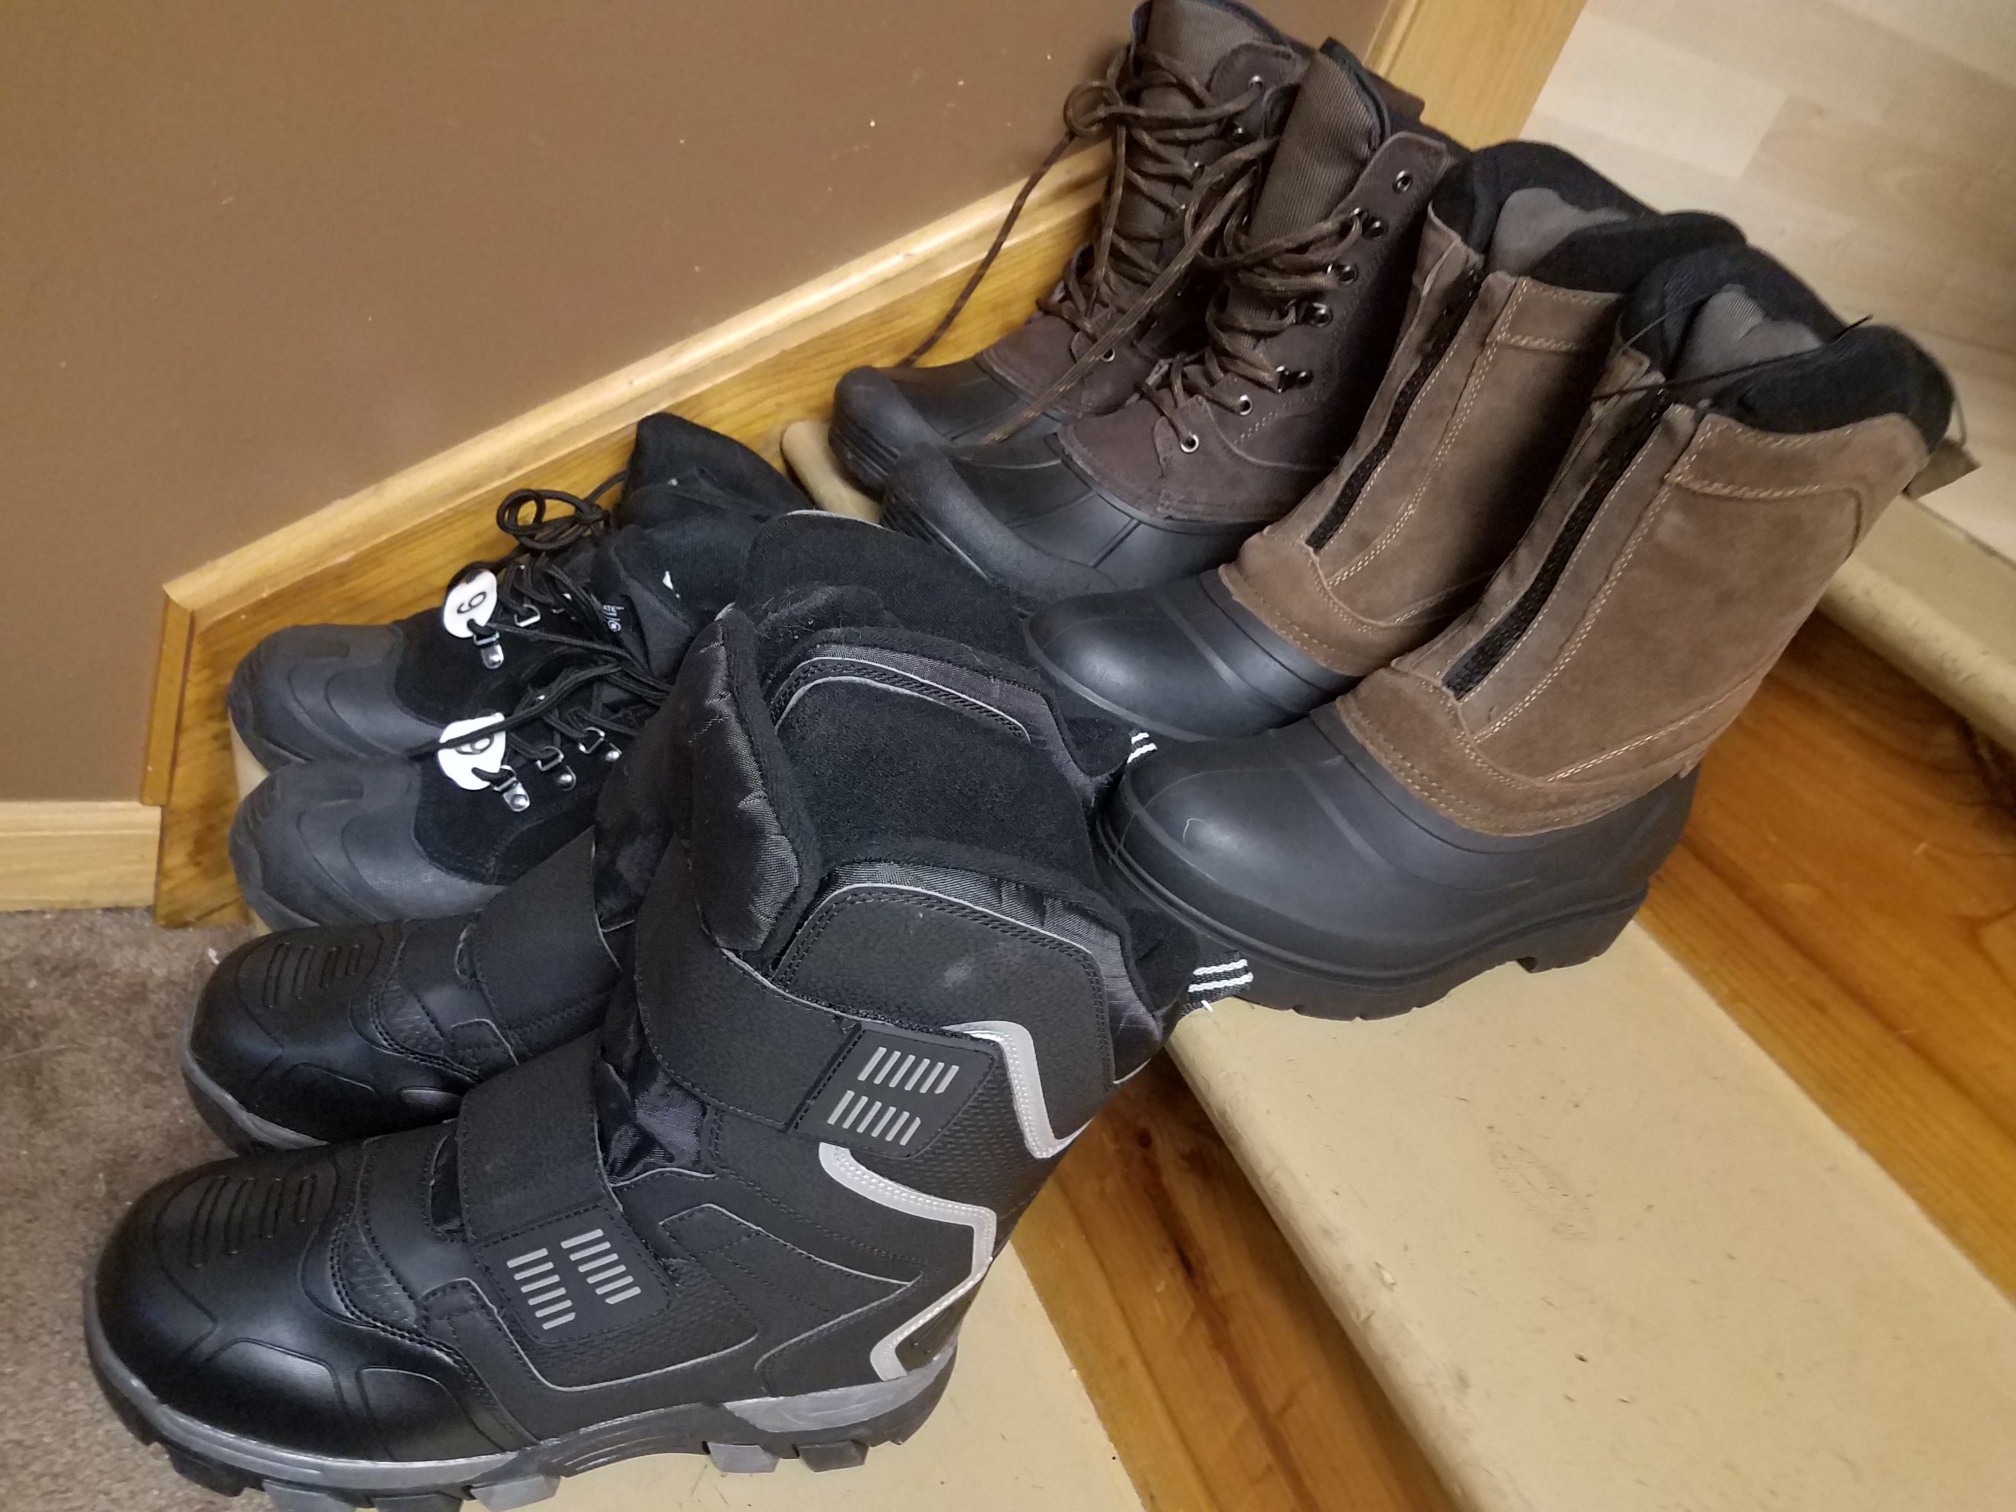 winter boot clearance at Meijer 